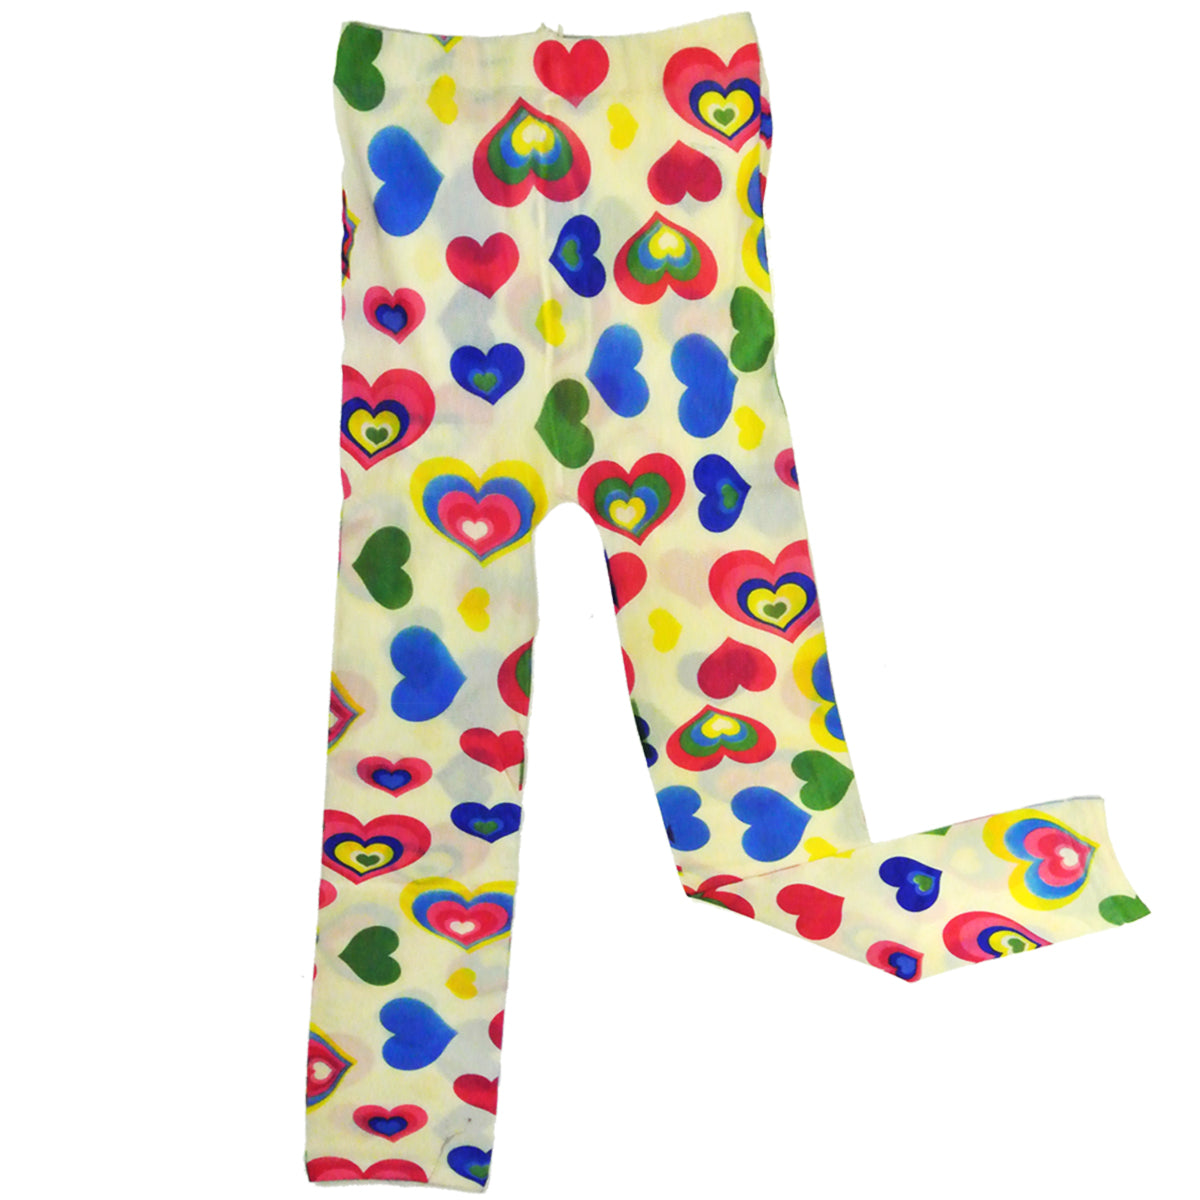 Wrapables Colorful Footless Tights Leggings